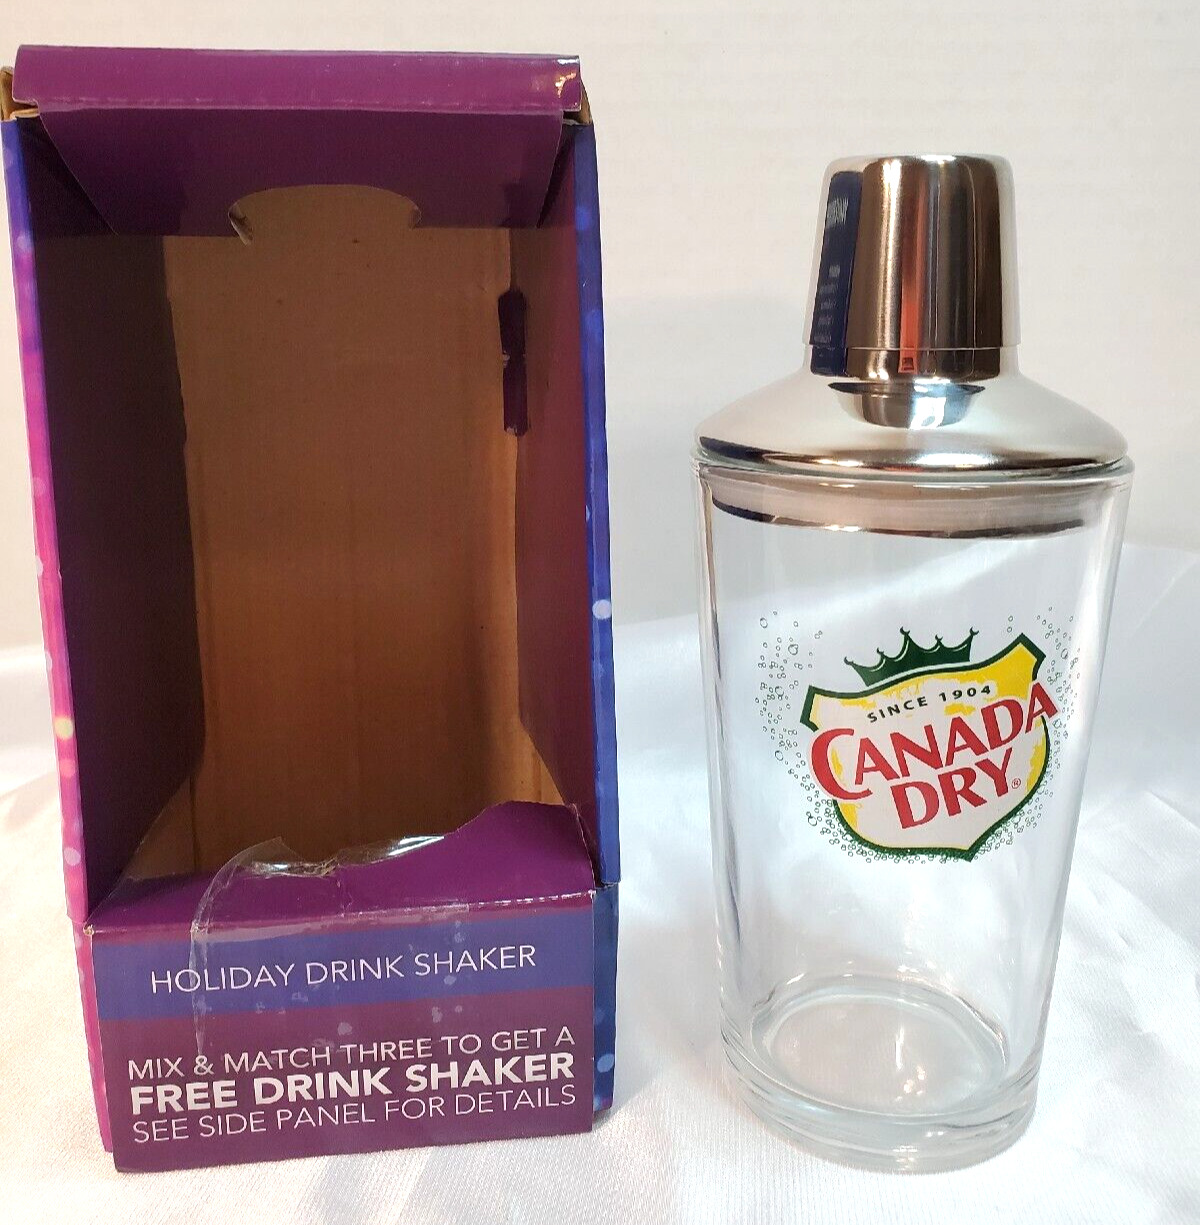 2014 Canada Dry Ginger Ale Drink Shaker With Drink Recipes On Box OPEN BOX